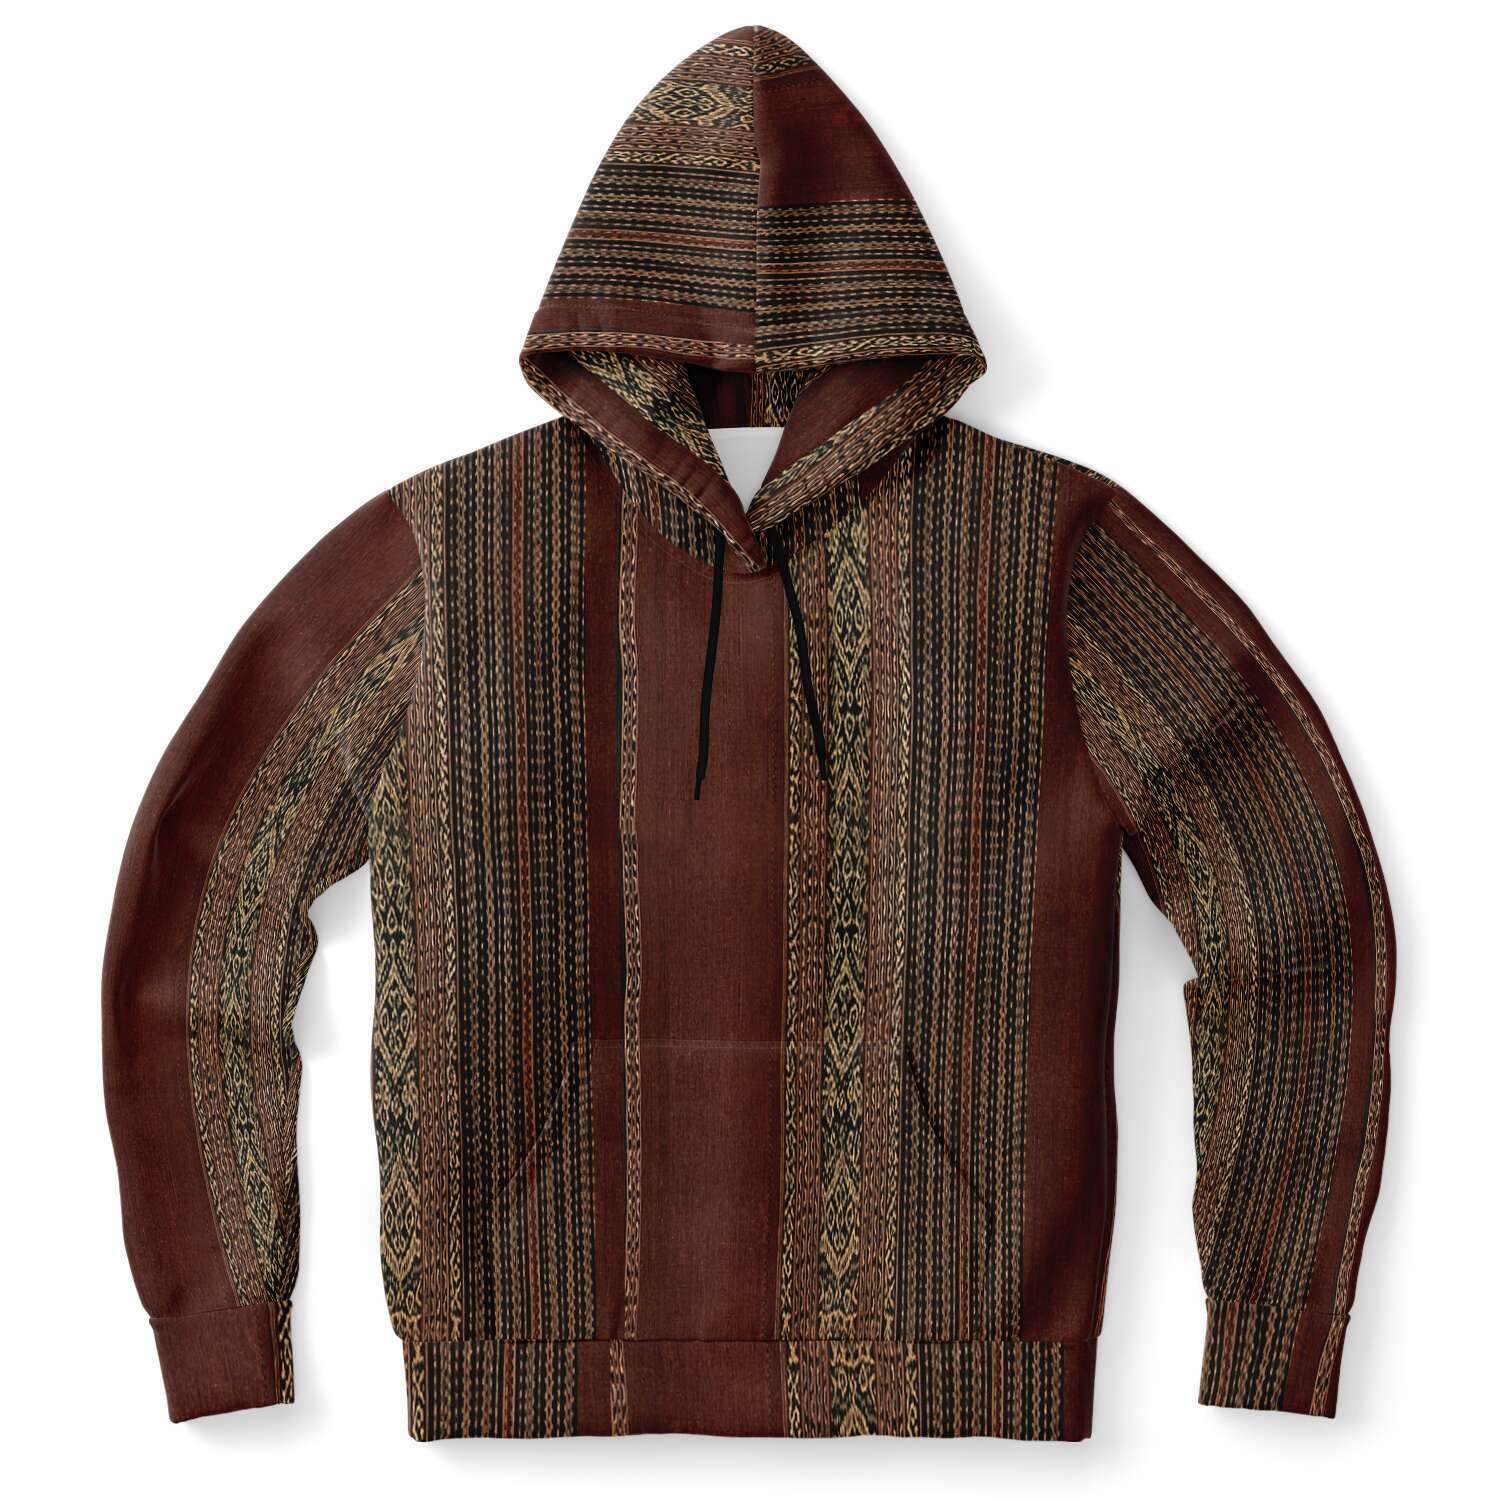 Fashion Hoodie - AOP XS Woven Ikat-Inspired Ethnic Copper Colored Boho Hippy Batik Thai Laos Indian Indonesia Textile Tribal Pullover Hoodie